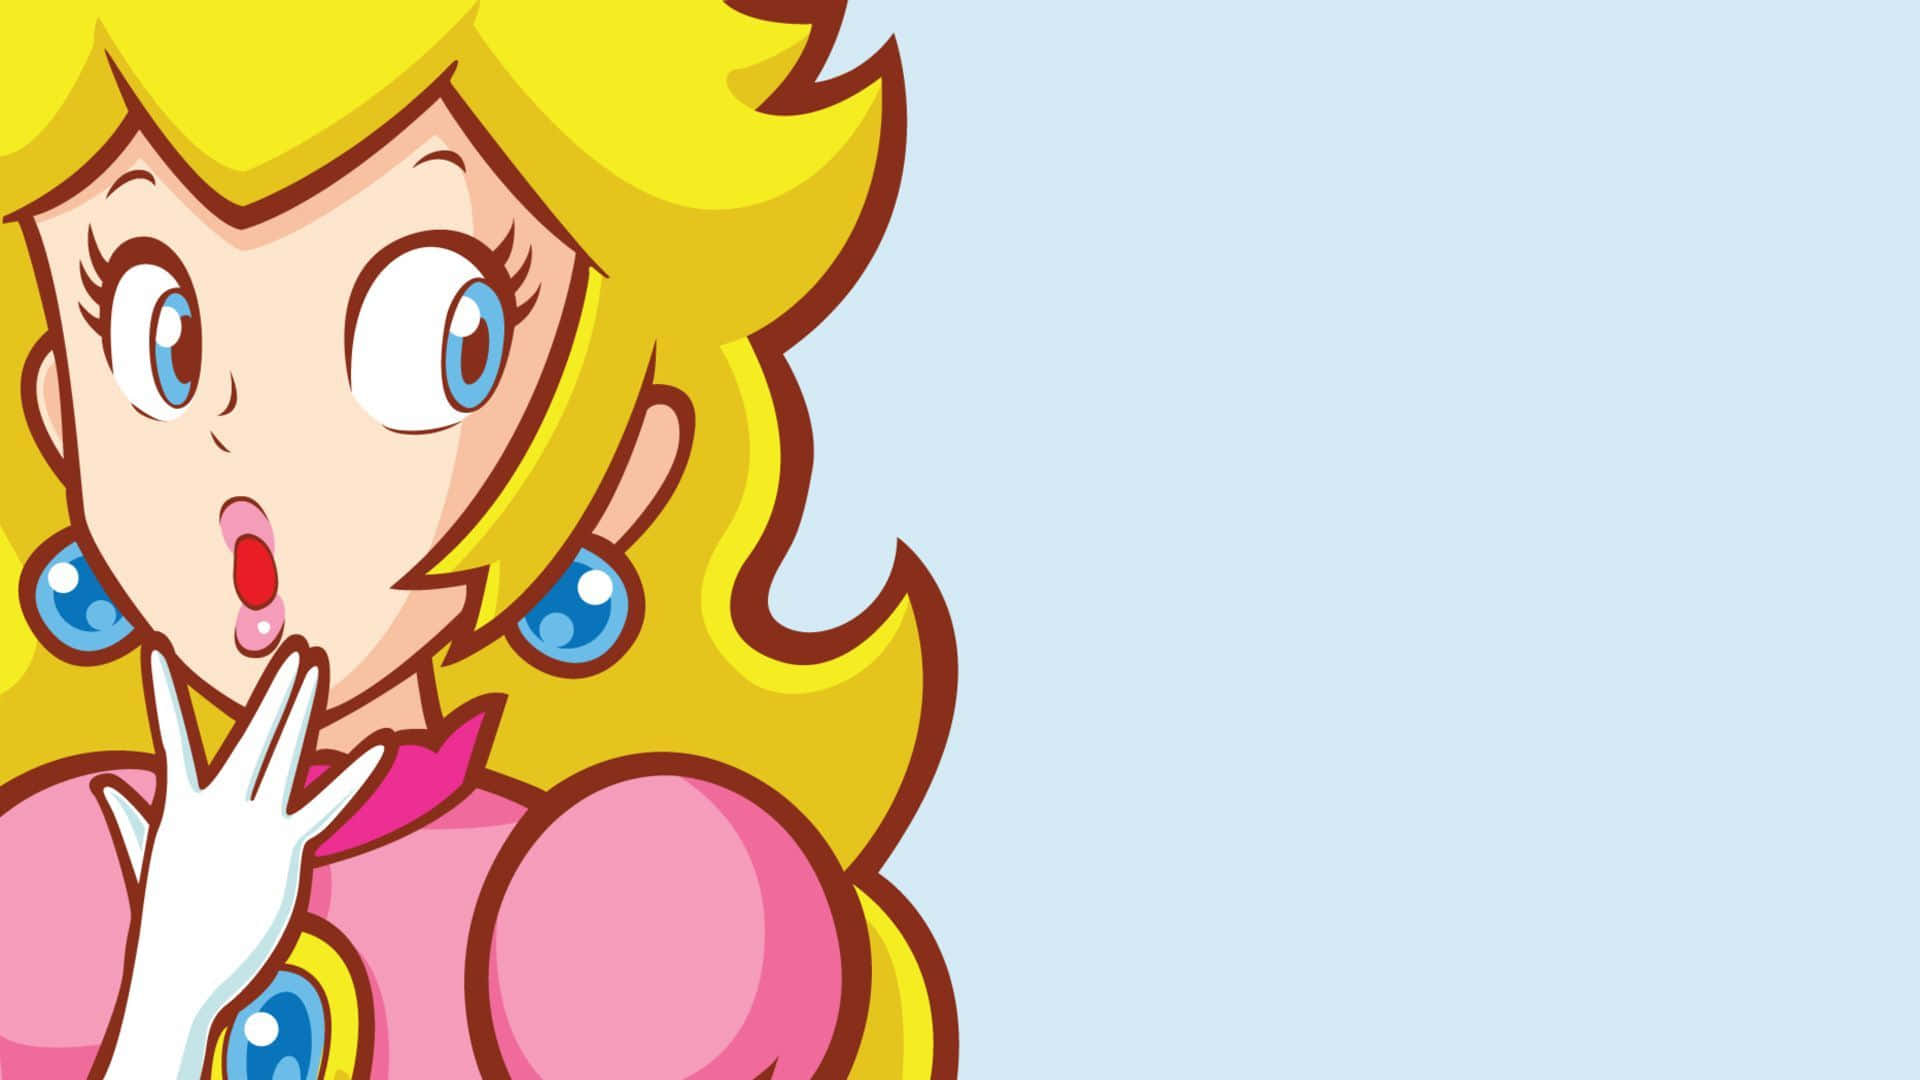 Peach is a fictional character in the Mario franchise. She is the princess of the Mushroom Kingdom and the damsel in distress. She is often the main damsel in distress in the games, but has also been given more active roles in some of them. - Princess Peach